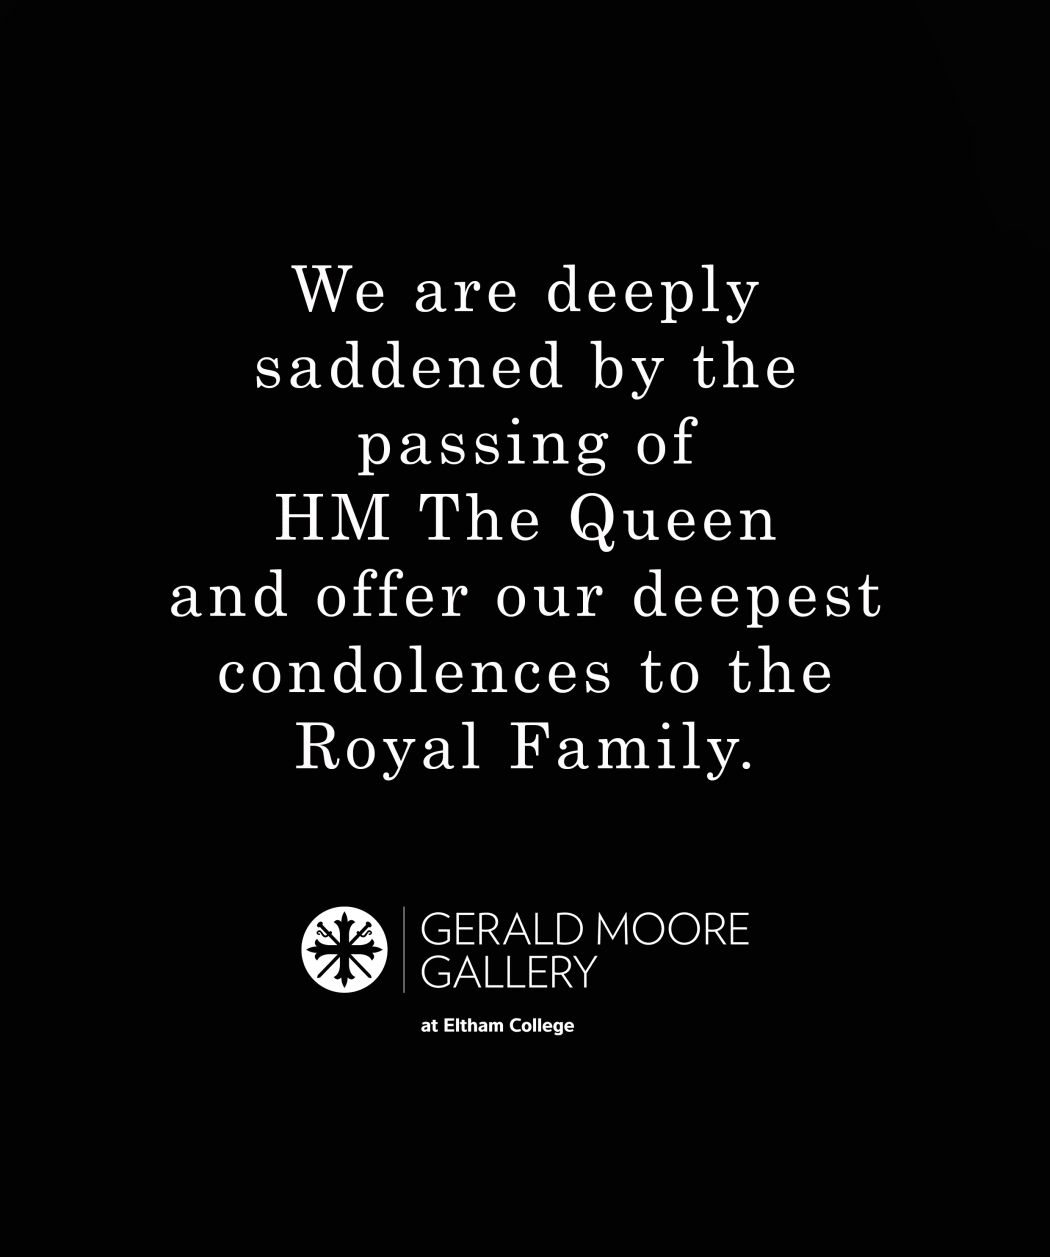 We are deeply saddened by the passing of HM The Queen and offer our deepest condolences to the Royal Family.